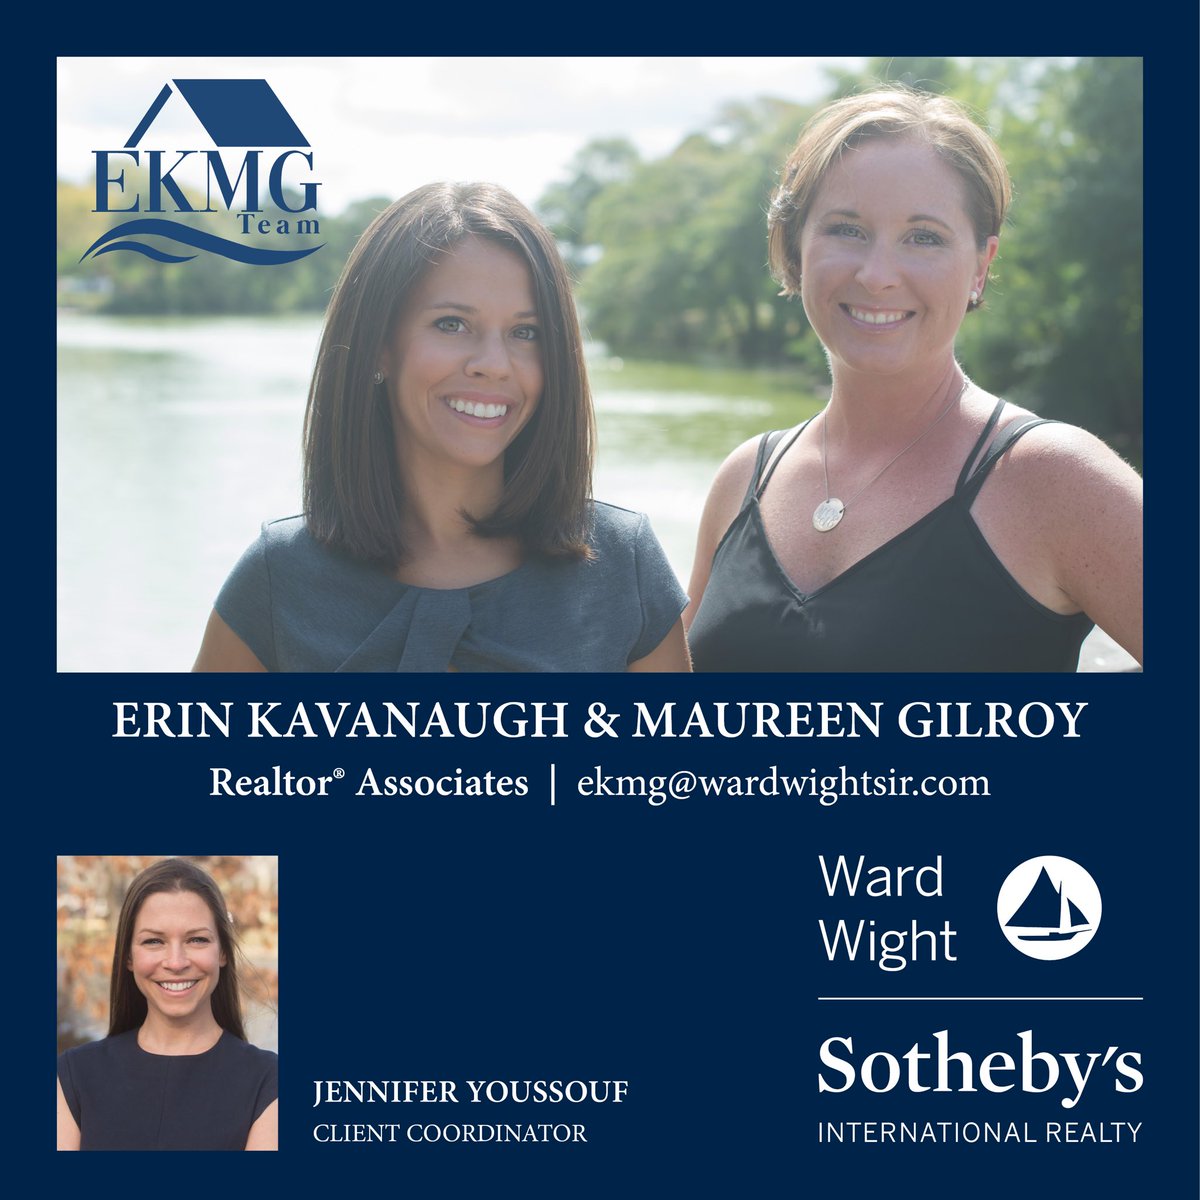 The @slheightspta board would like to thank Erin Kavanaugh, Maureen Gilroy and Jennifer Youssouf of the EKMG Team at Ward Wight Sotheby’s International Realty of Sea Girt for being a @slheights Gold Star Sponsor! #springlakeheights #springlake #avon #manasquan #WallTownship